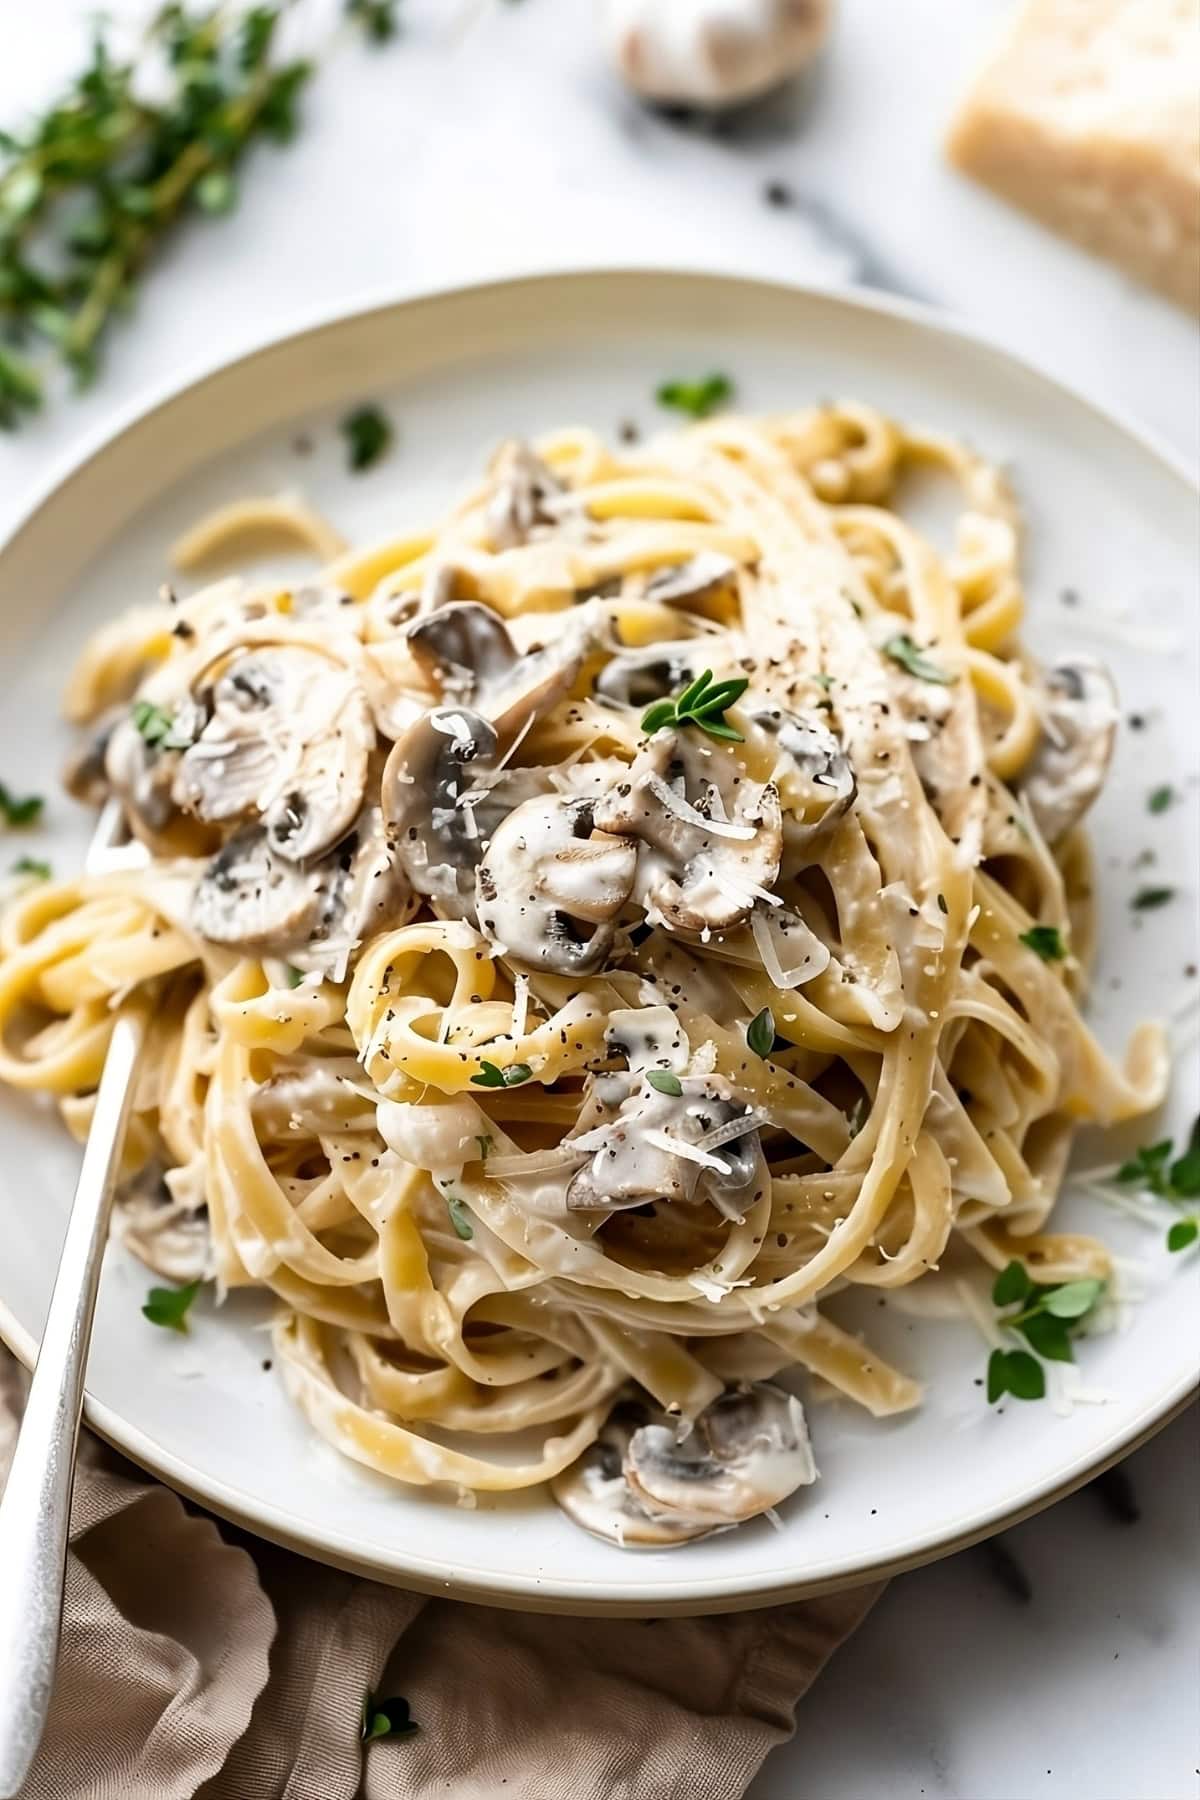 Creamy mushroom pasta in a white plate garnished with parmesan cheese.